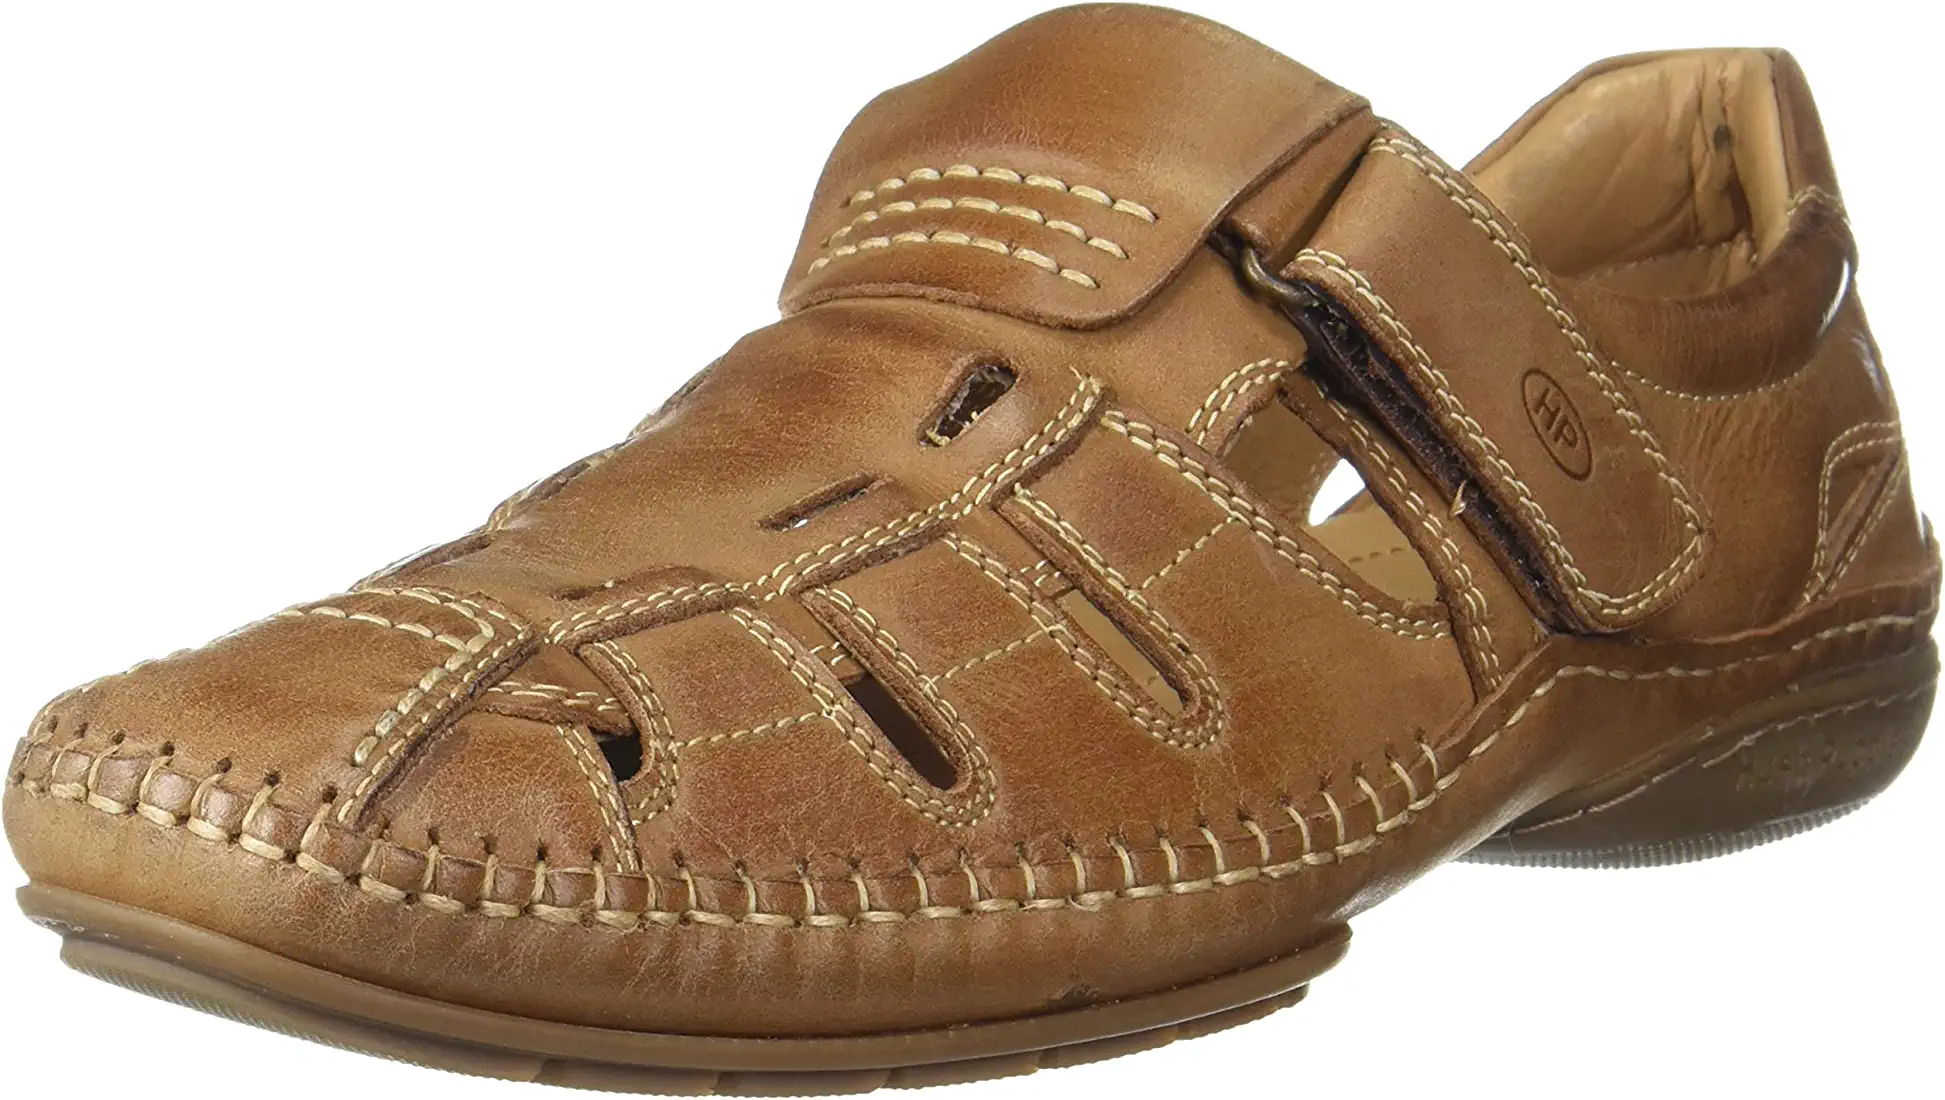 Hush Puppies Mens Cash Loafers